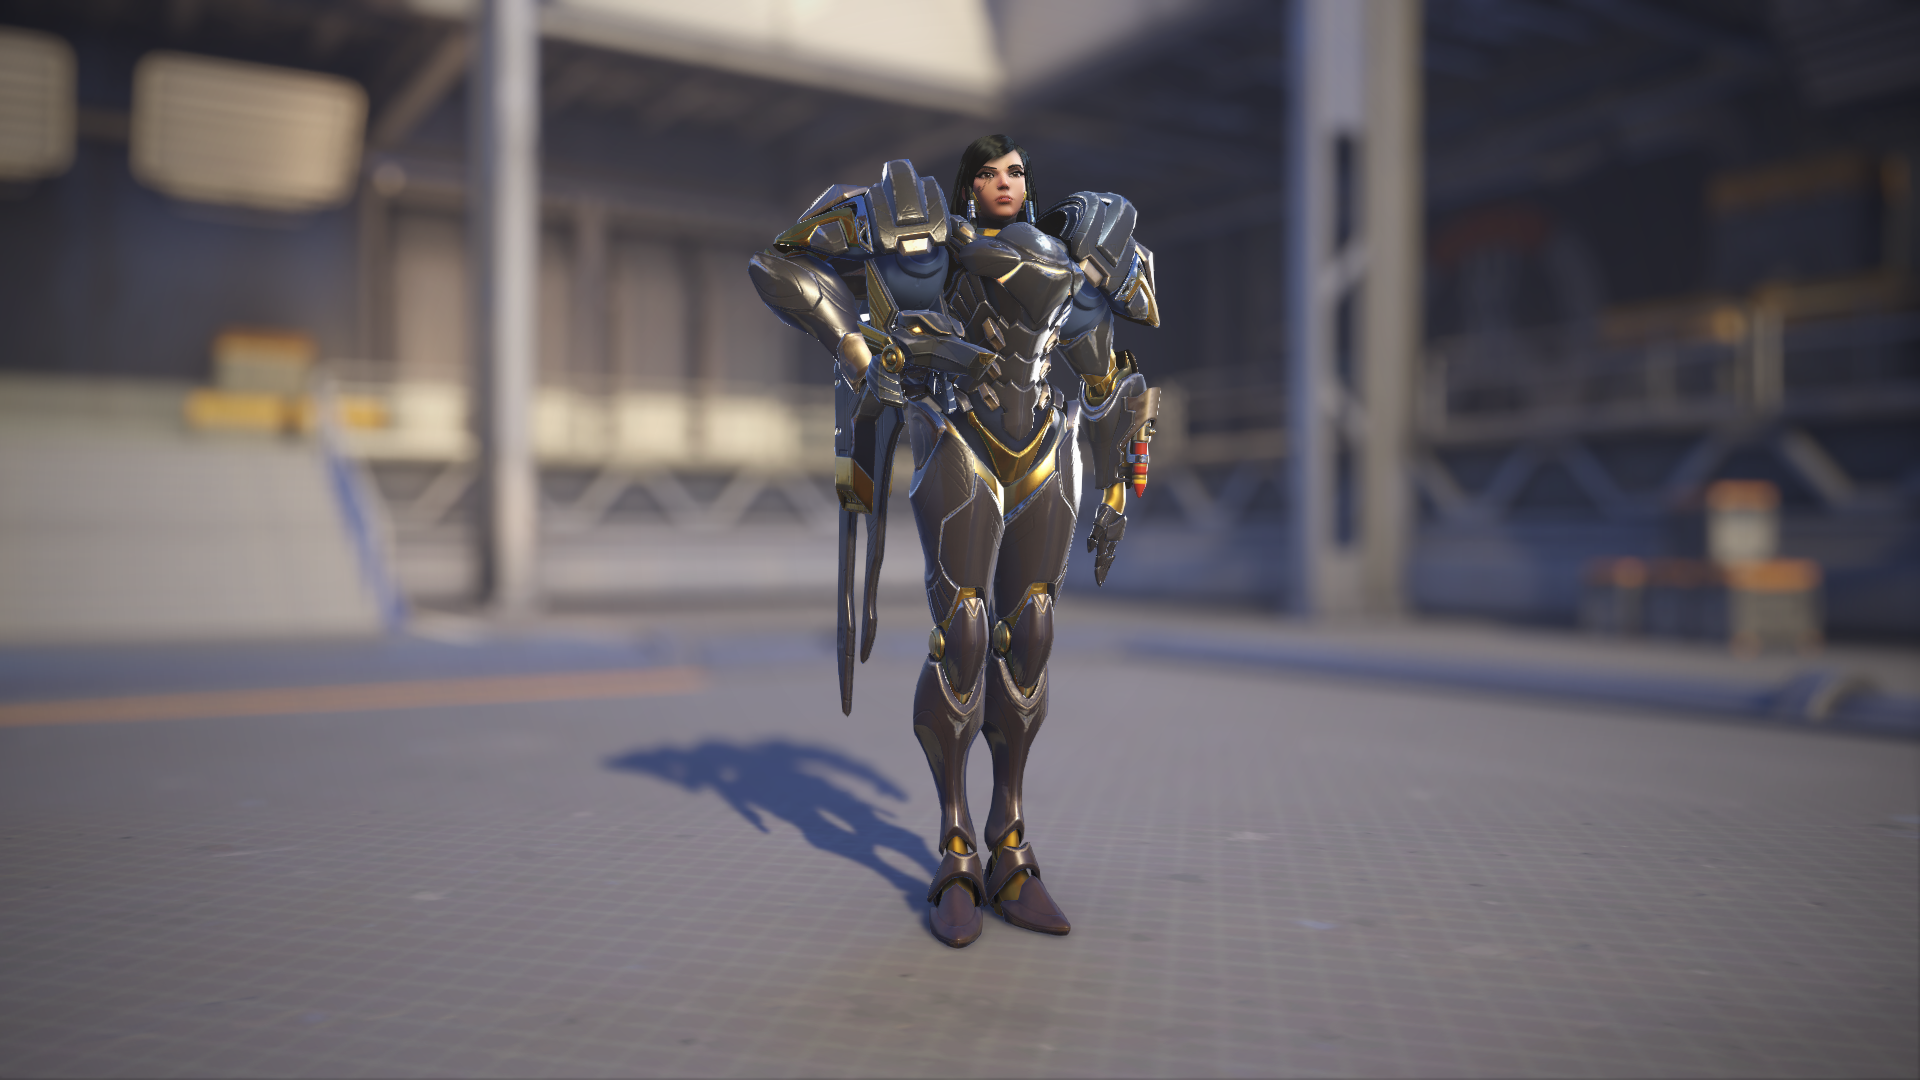 Pharah models her Anubis skin in Overwatch 2.